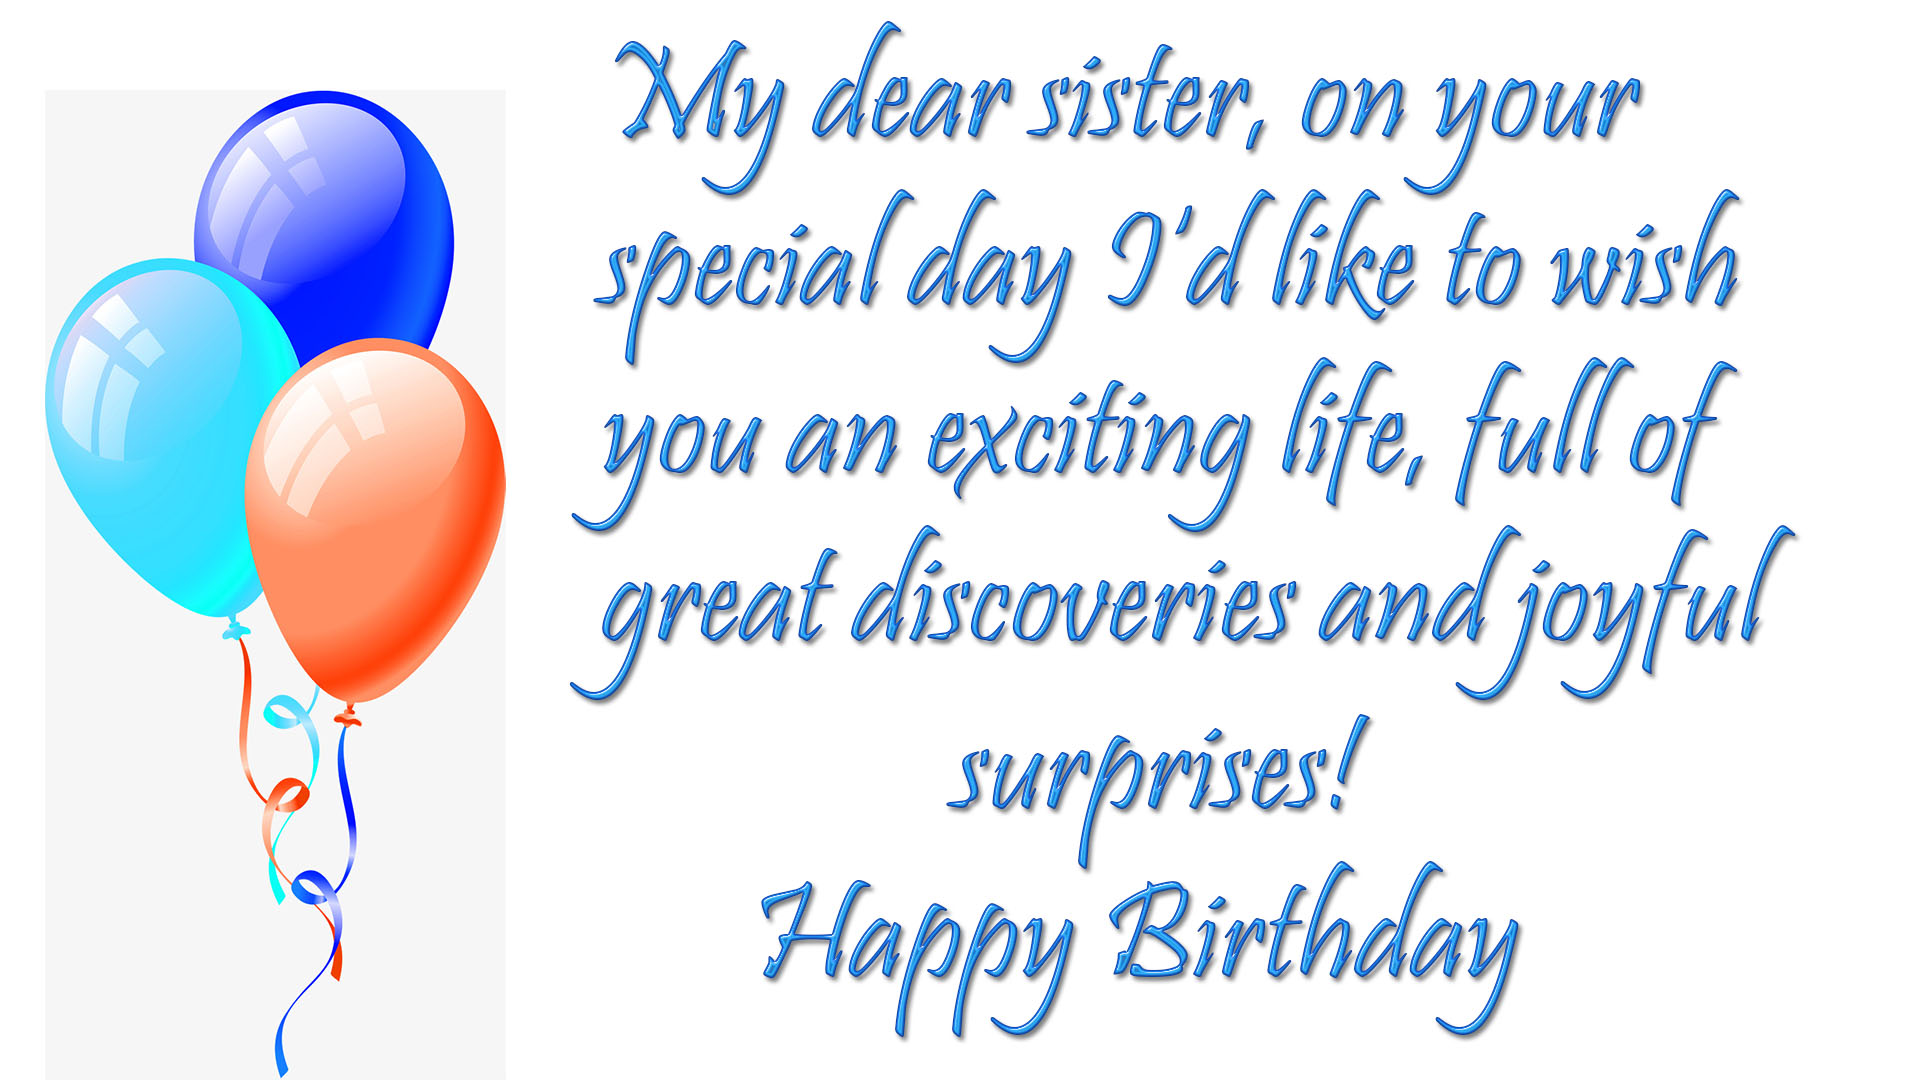 Sister s birthday. Happy Birthday sister. Birthday Wishes for sister. Congratulations Happy Birthday my sister. Happy Birthday Dear sister.